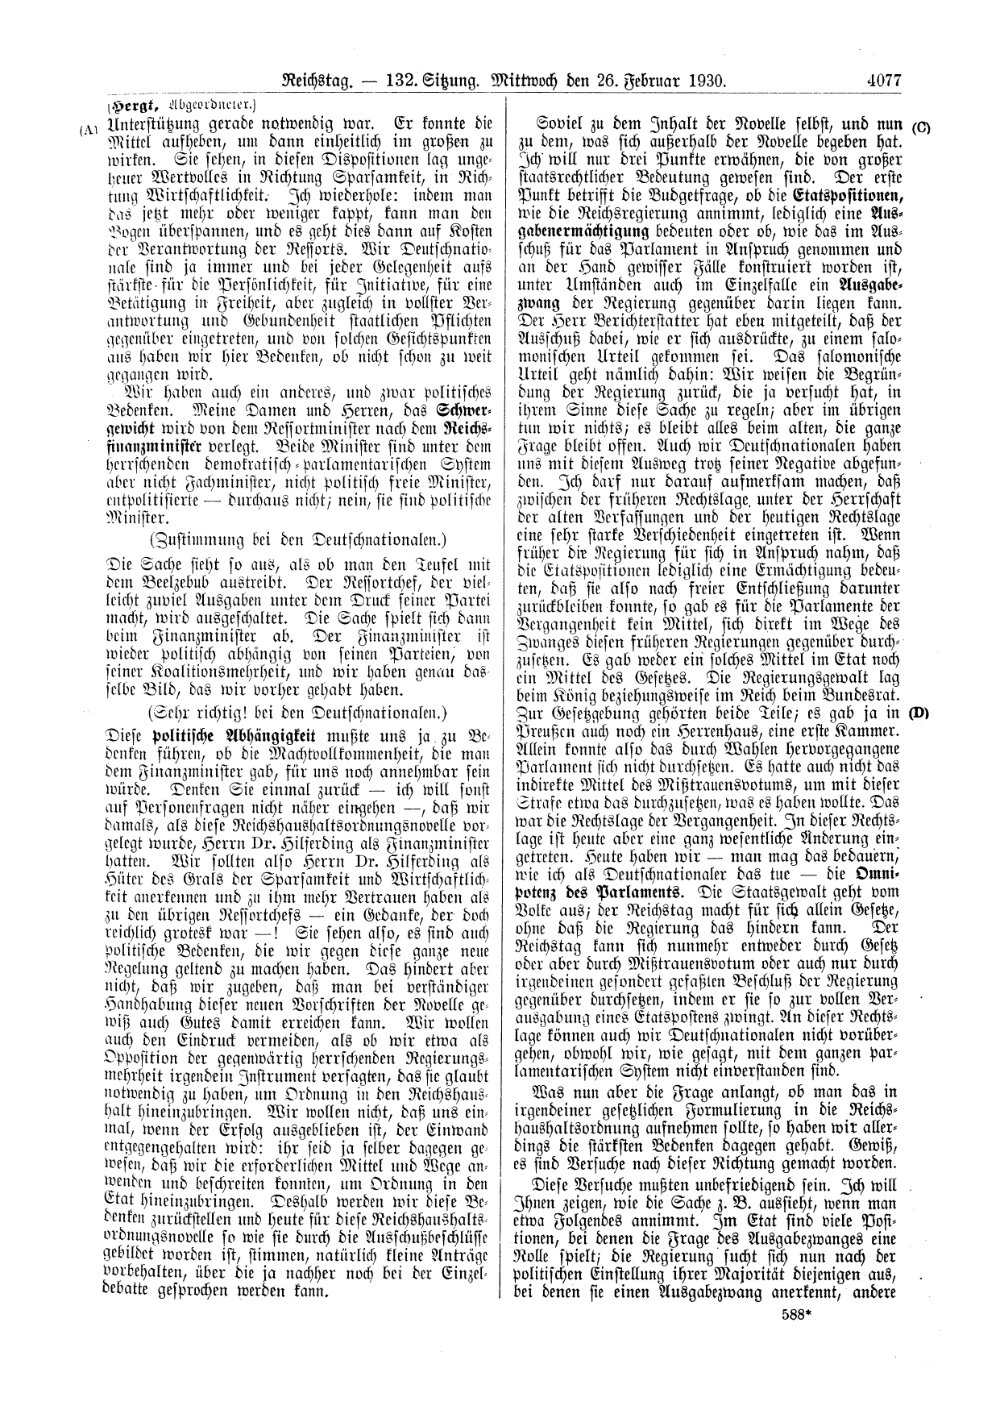 Scan of page 4077